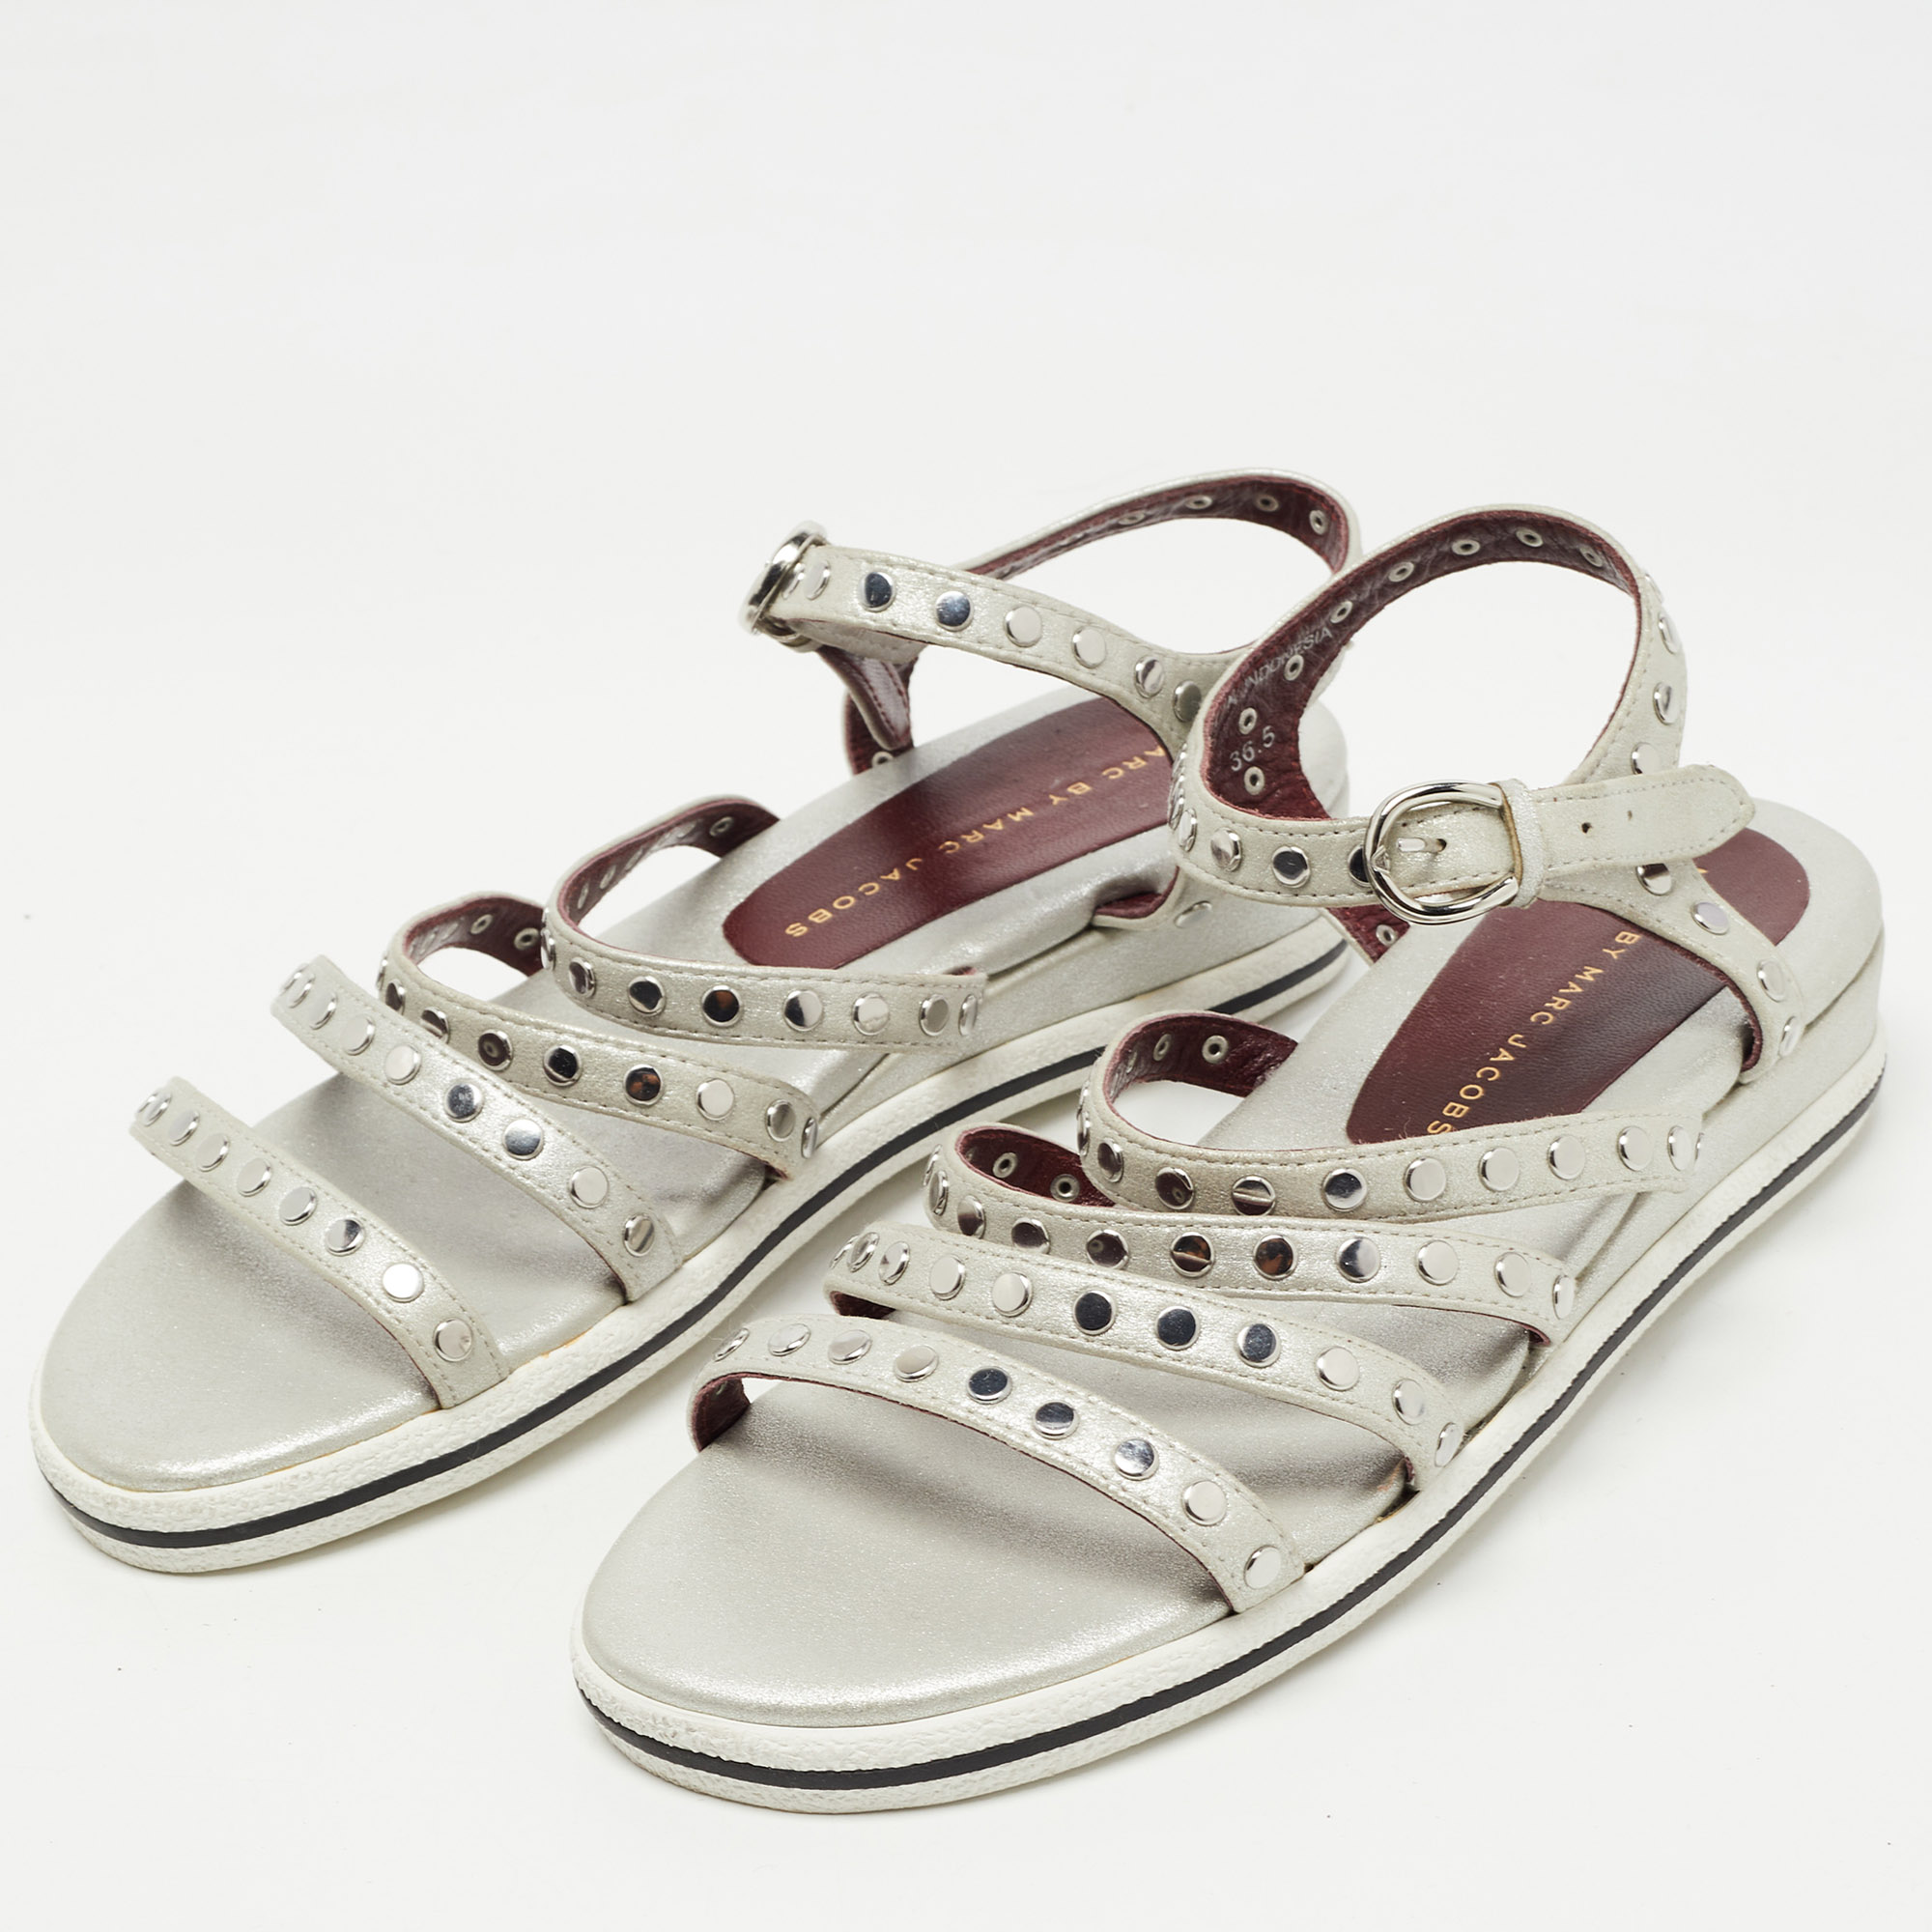 

Marc by Marc Jacobs Silver Leather Gena Studded Ankle Strap Sandals Size